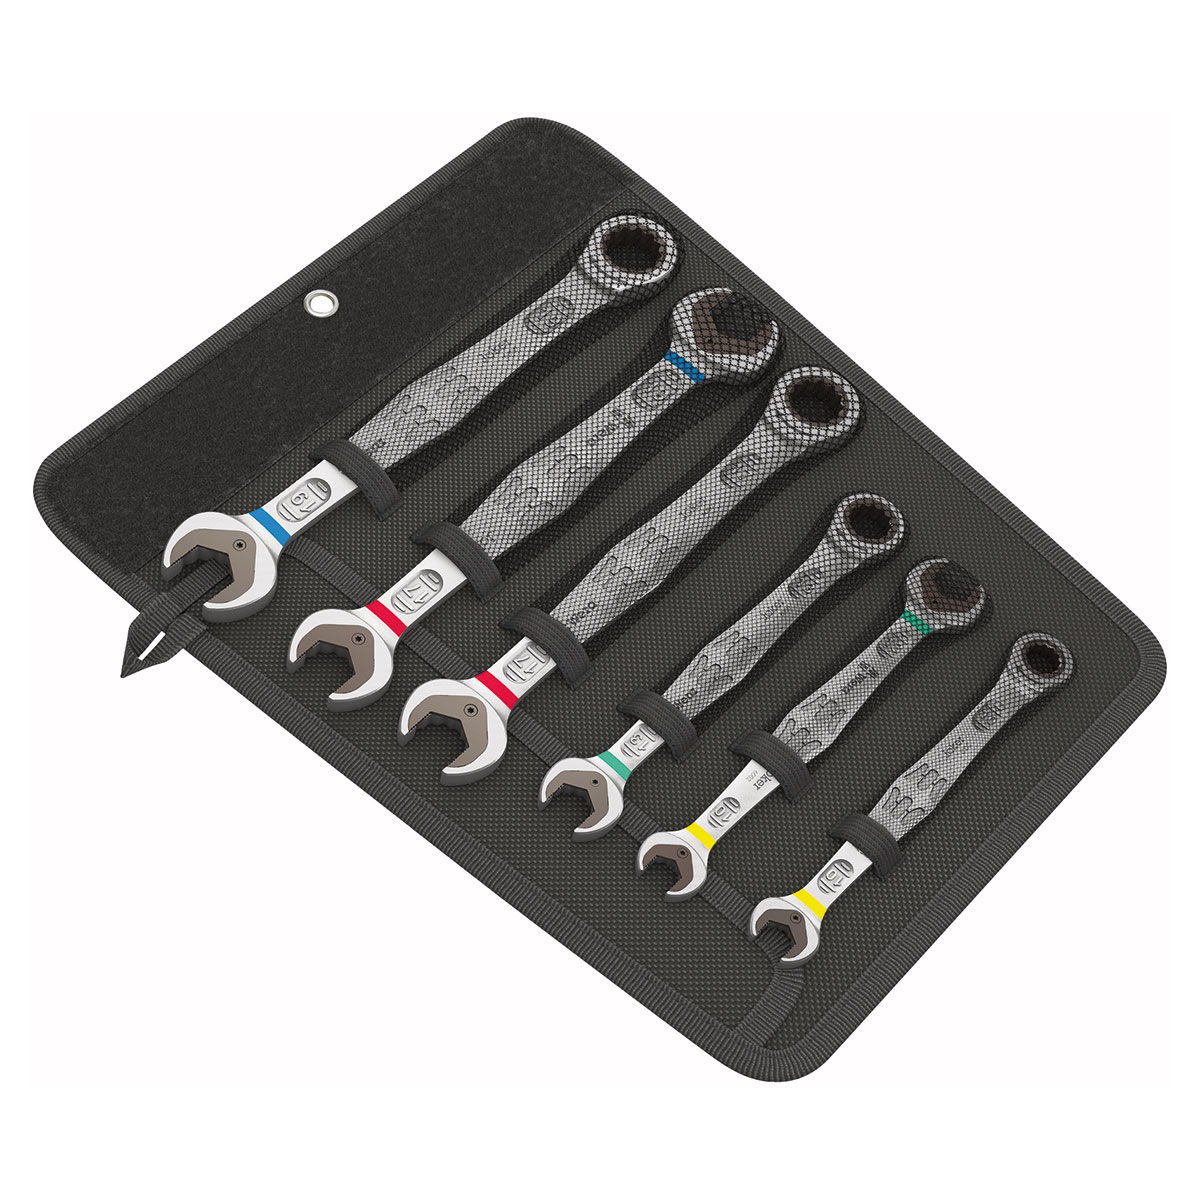 Wera Ratcheting Combination / Double Open-Ended Metric Wrenches (6 Piece Set)